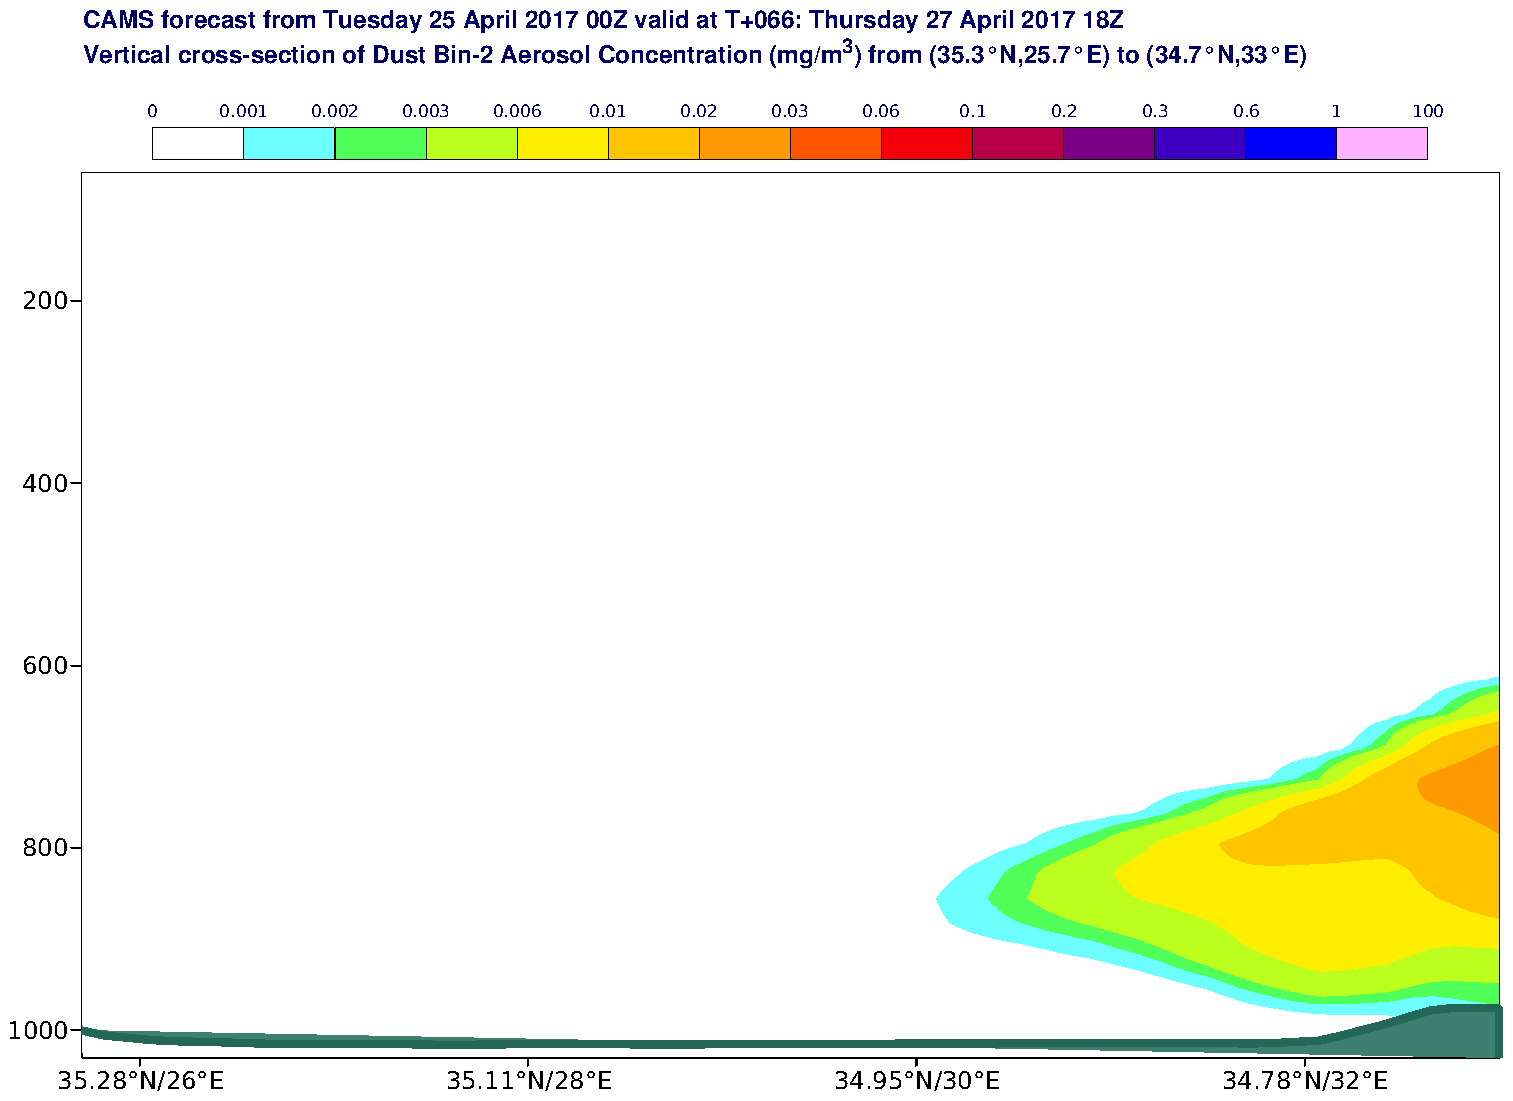 Vertical cross-section of Dust Bin-2 Aerosol Concentration (mg/m3) valid at T66 - 2017-04-27 18:00